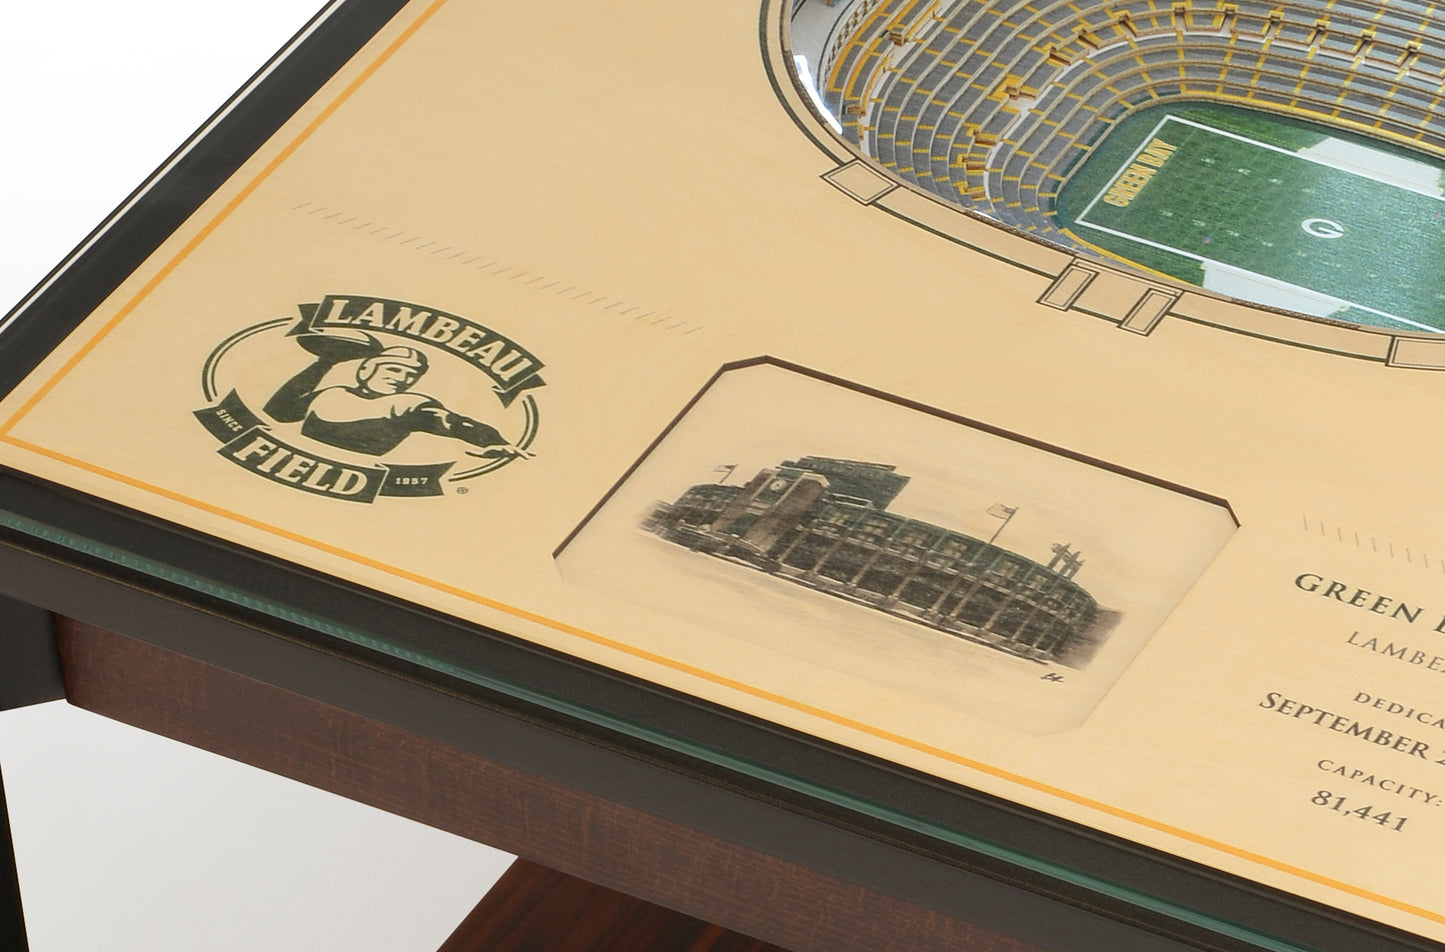 GREEN BAY PACKERS 25 LAYER 3D STADIUM LIGHTED END TABLE